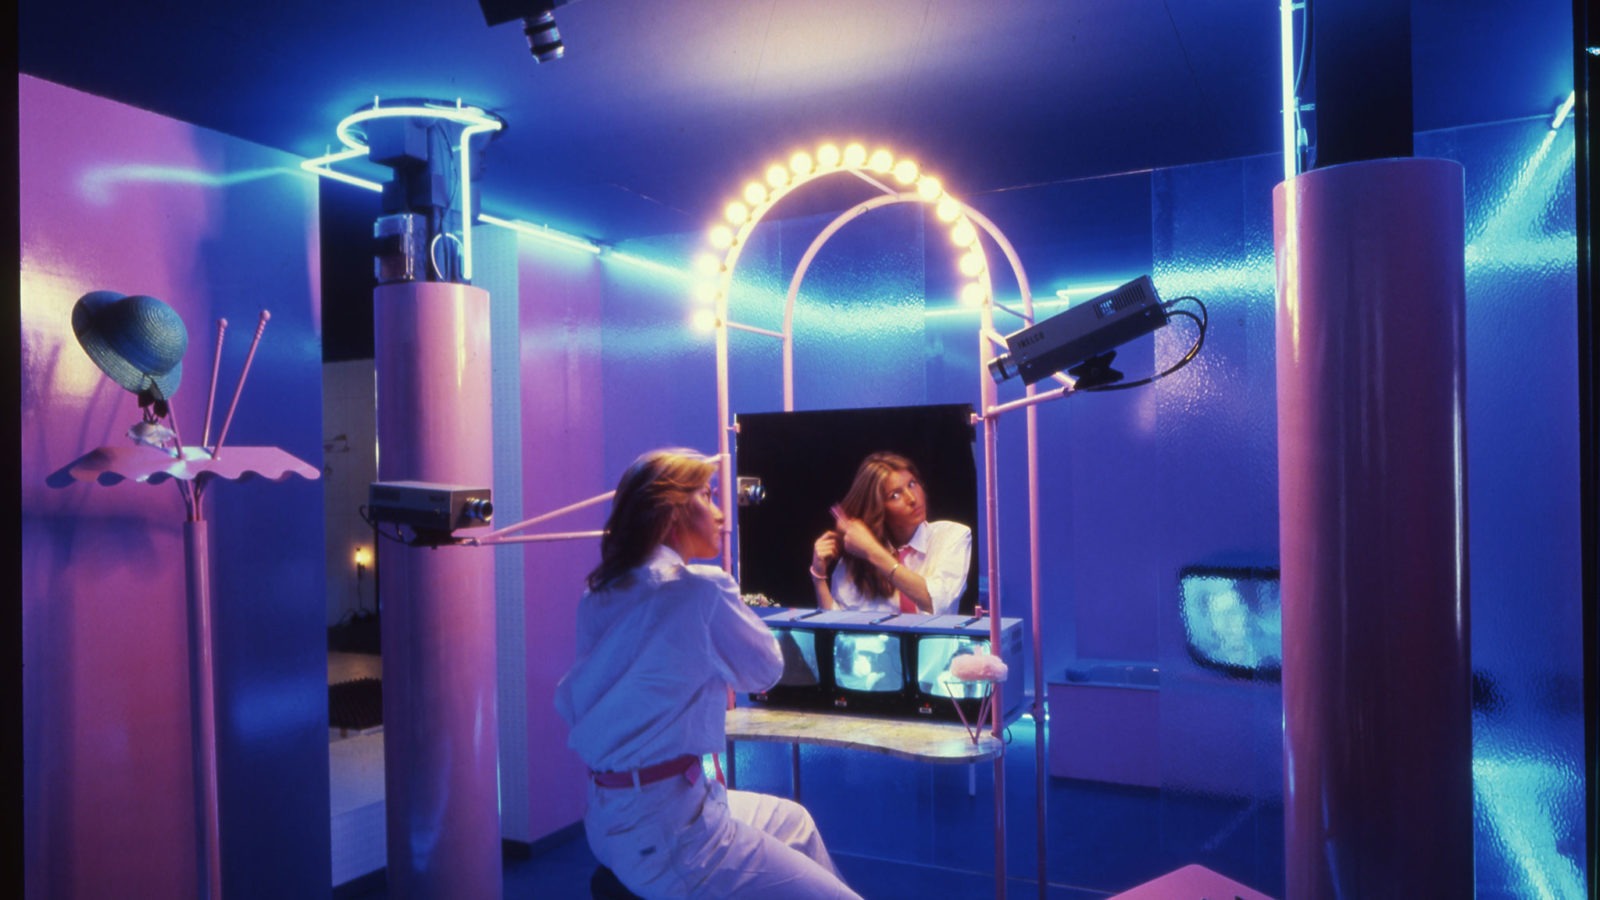 A woman combing her hair and looking at a mirror in a lilac-blue room dimly lit with neon lights and cameras pointed at her.